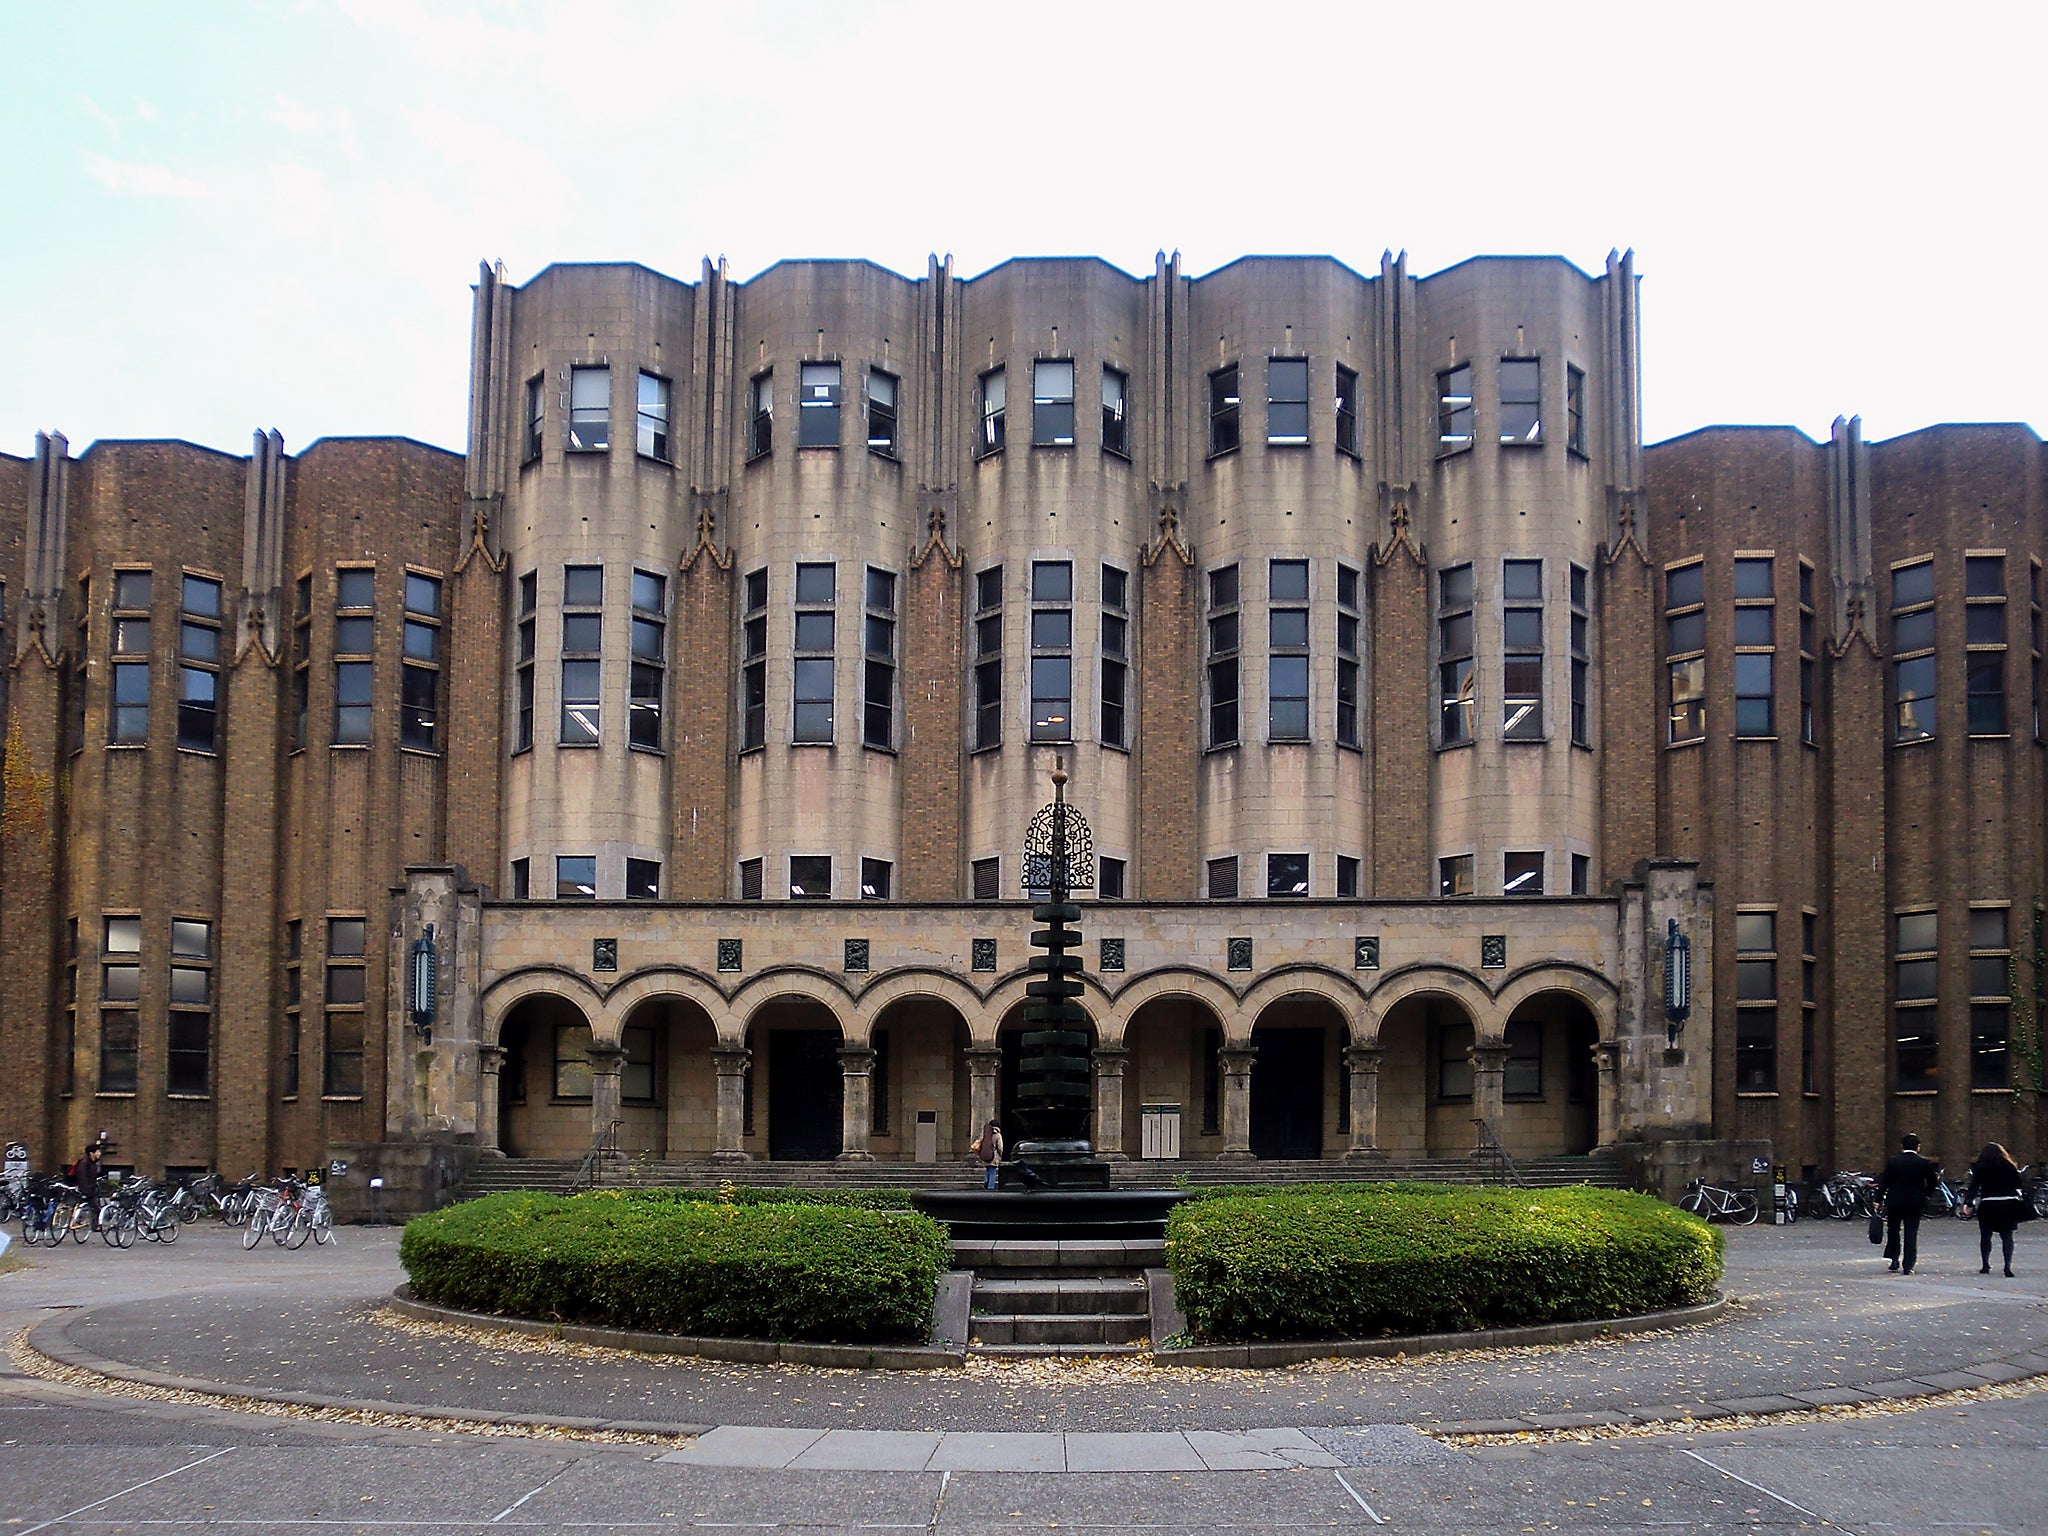 Only 20 per cent of the University of Tokyo’s applicants are female